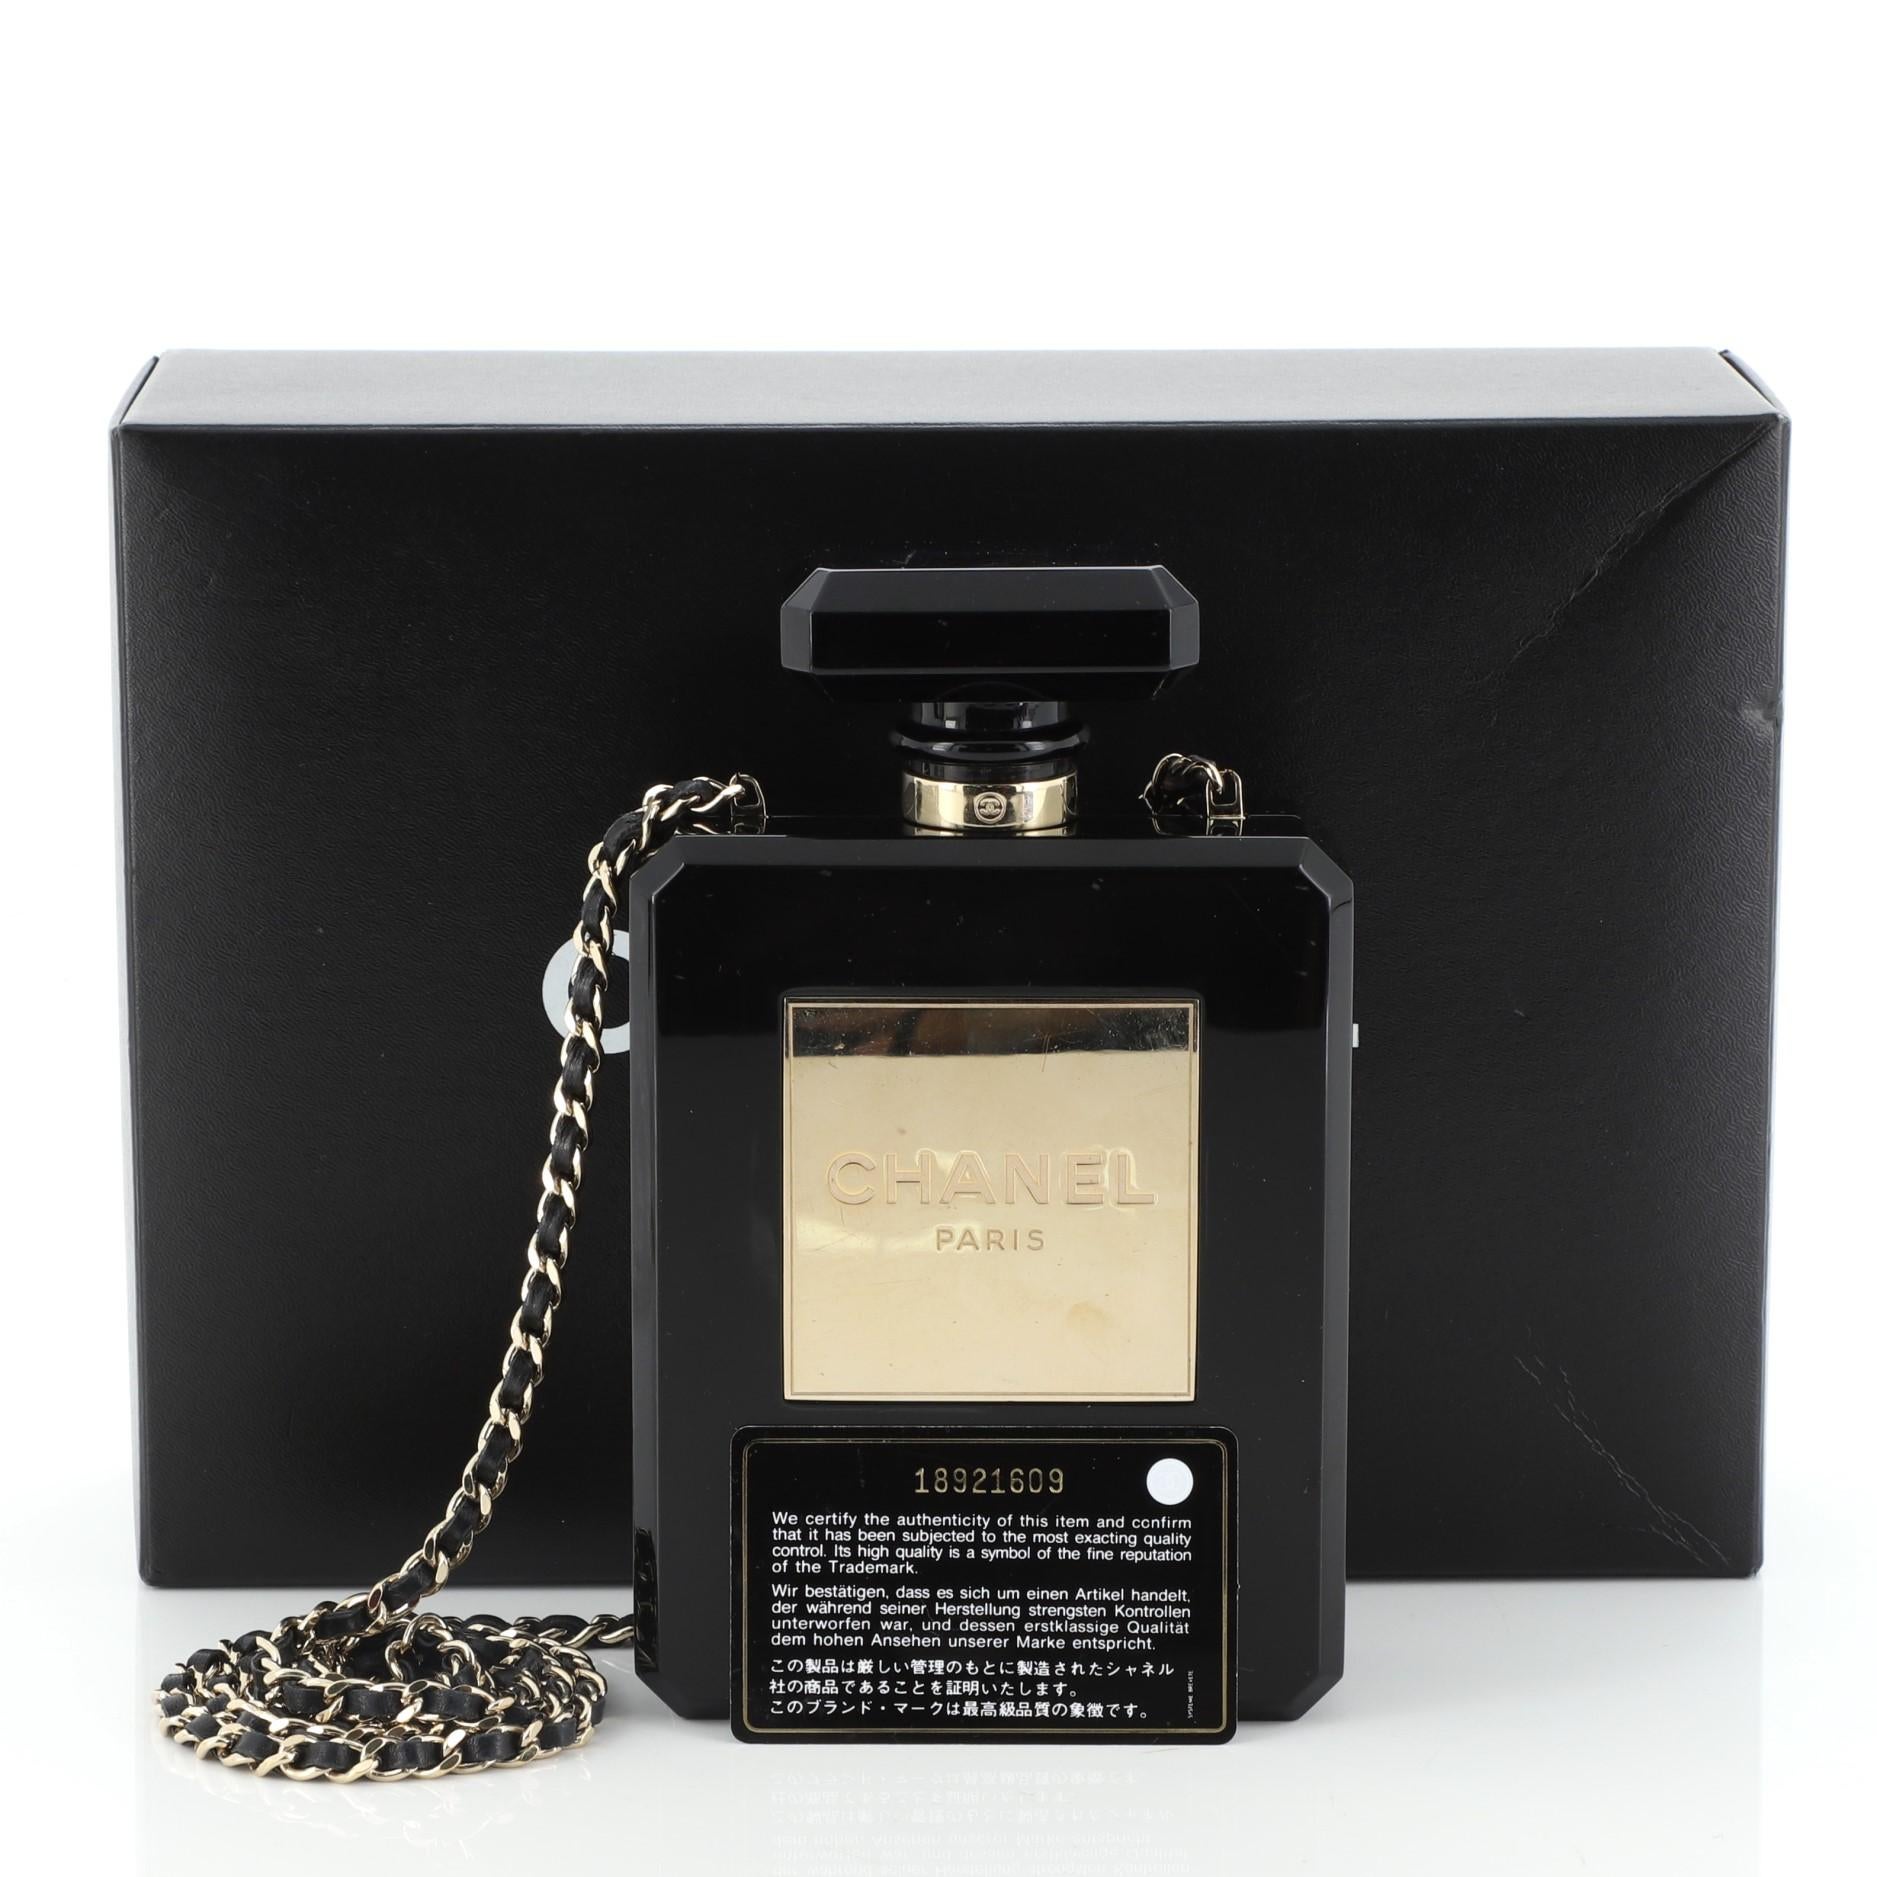 This Chanel Perfume Bottle Minaudiere Plexiglass, crafted from black plexiglass, features woven-in leather chain strap, Chanel Paris logo at front and gold-tone hardware. Its press-lock closure opens to a black leather interior. Hologram sticker